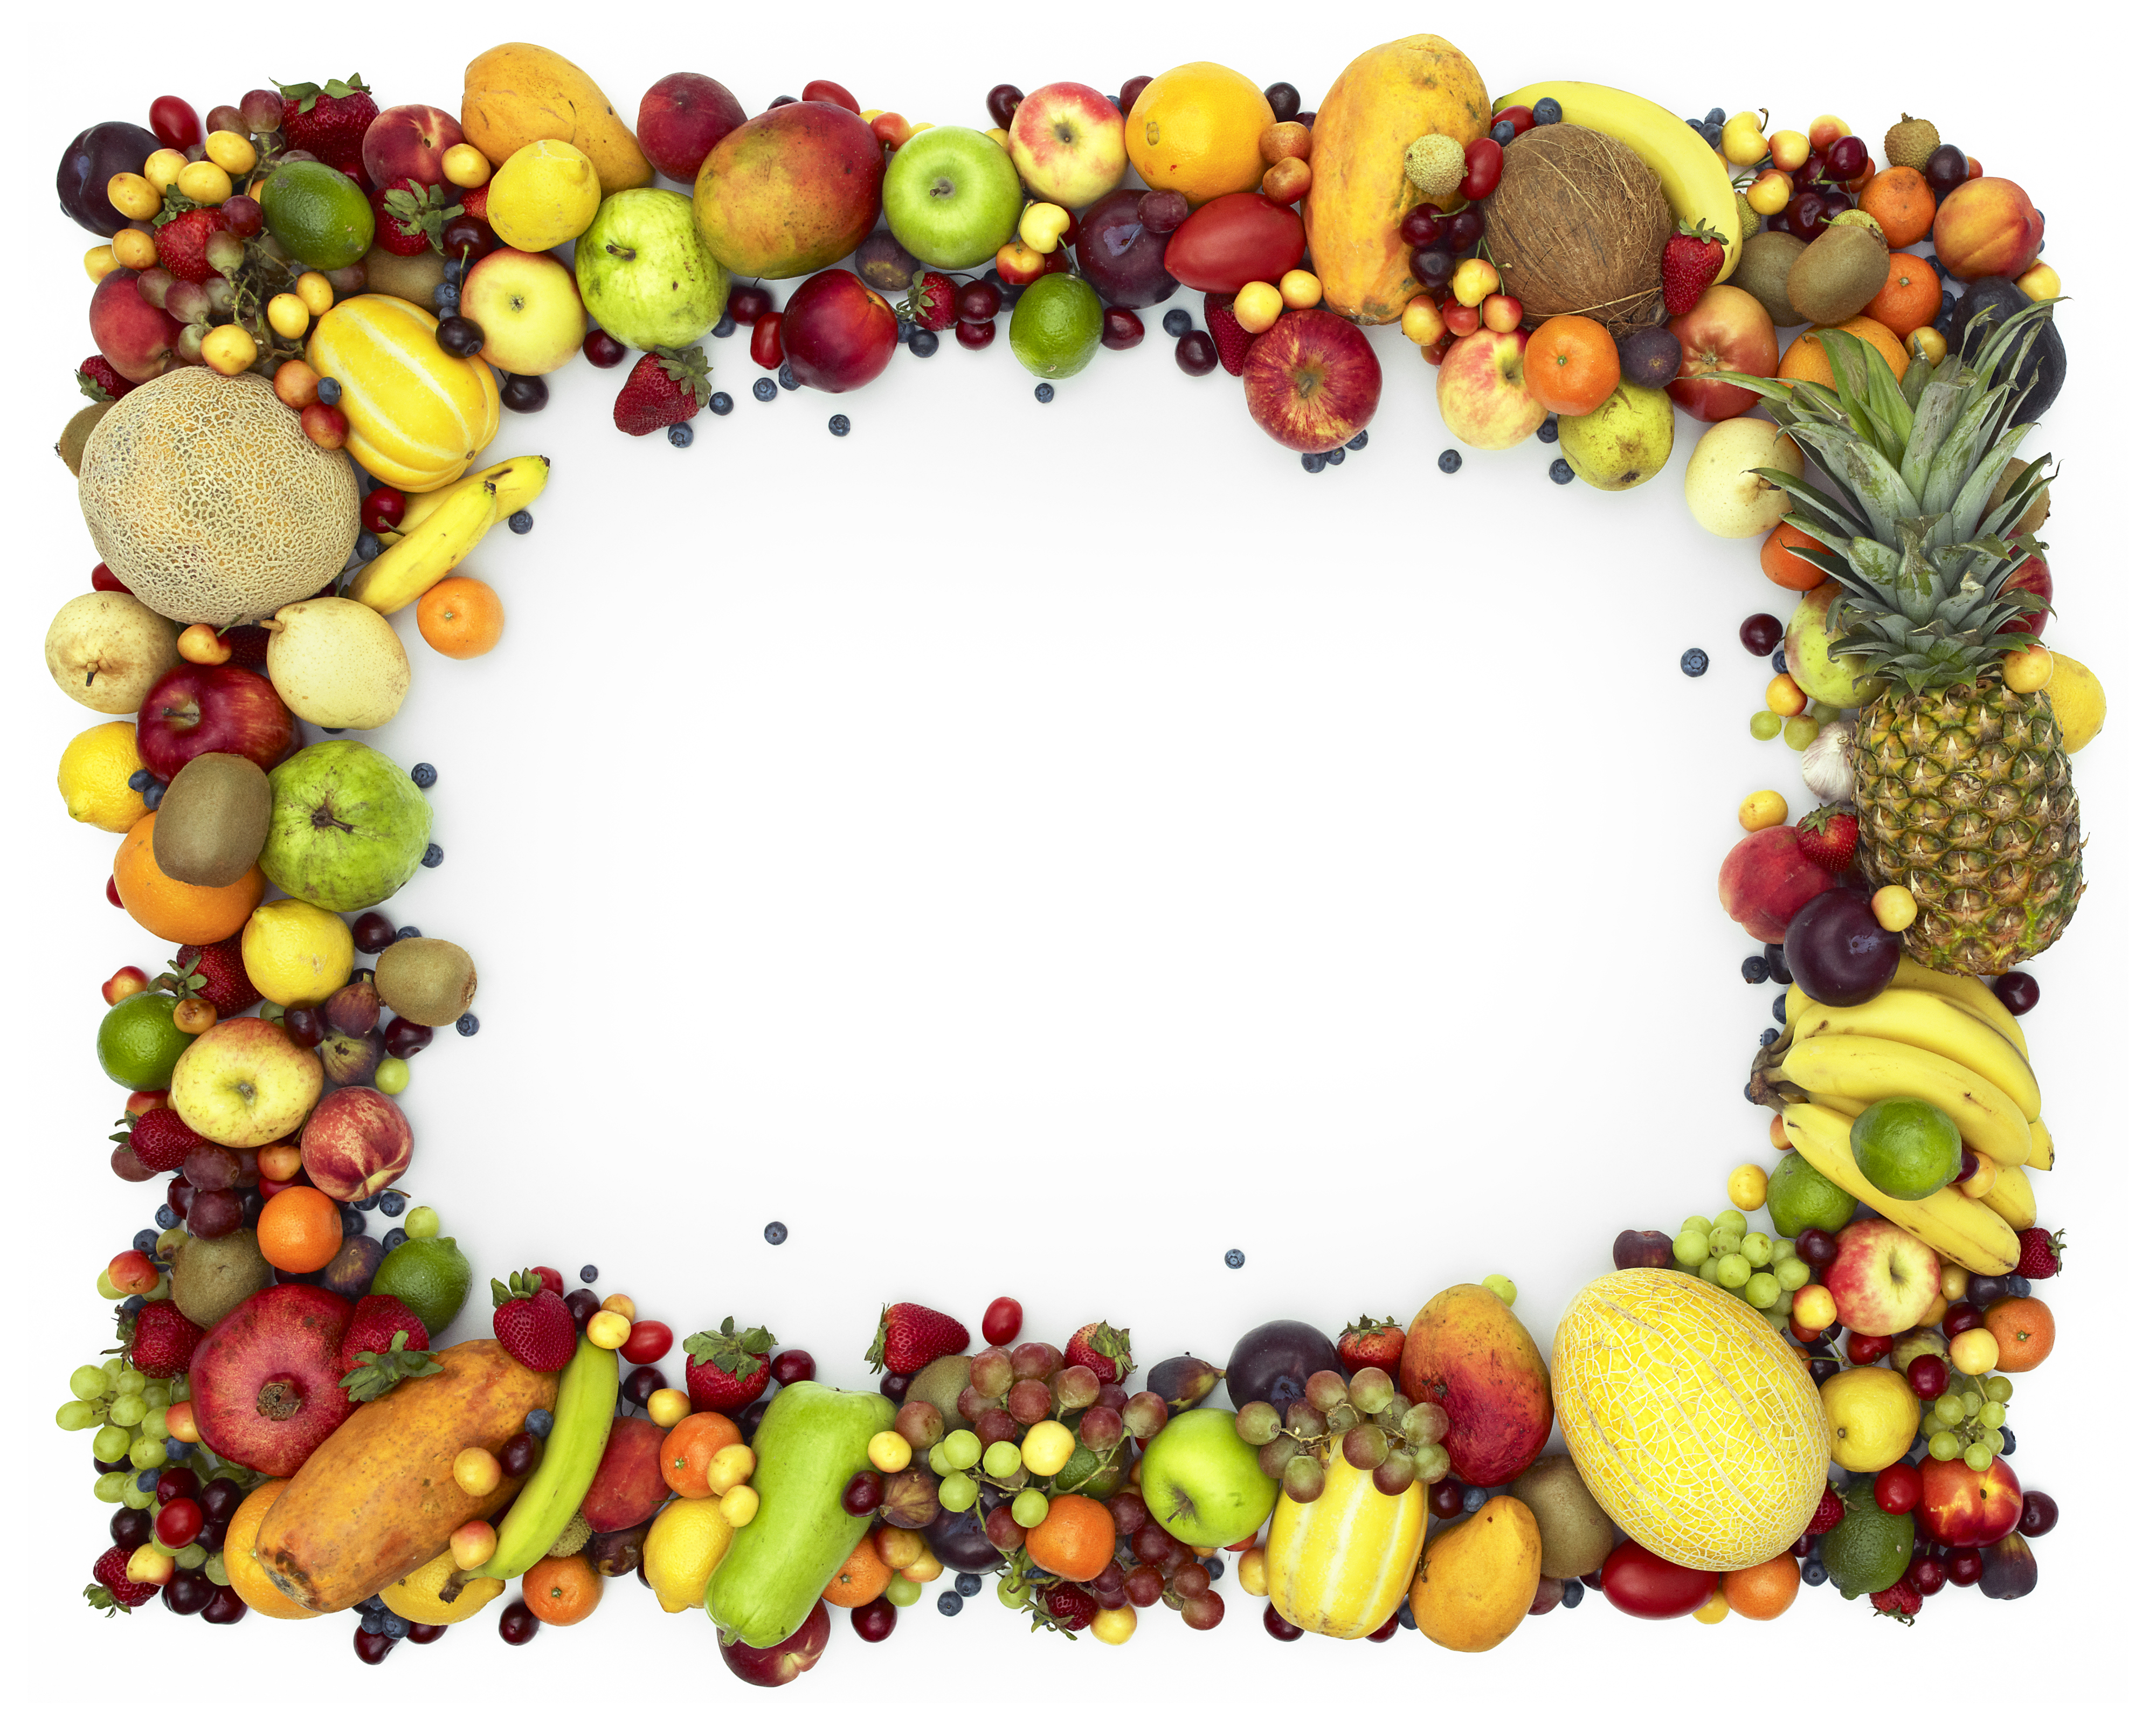 Fruit Frame Wallpapers High Quality | Download Free